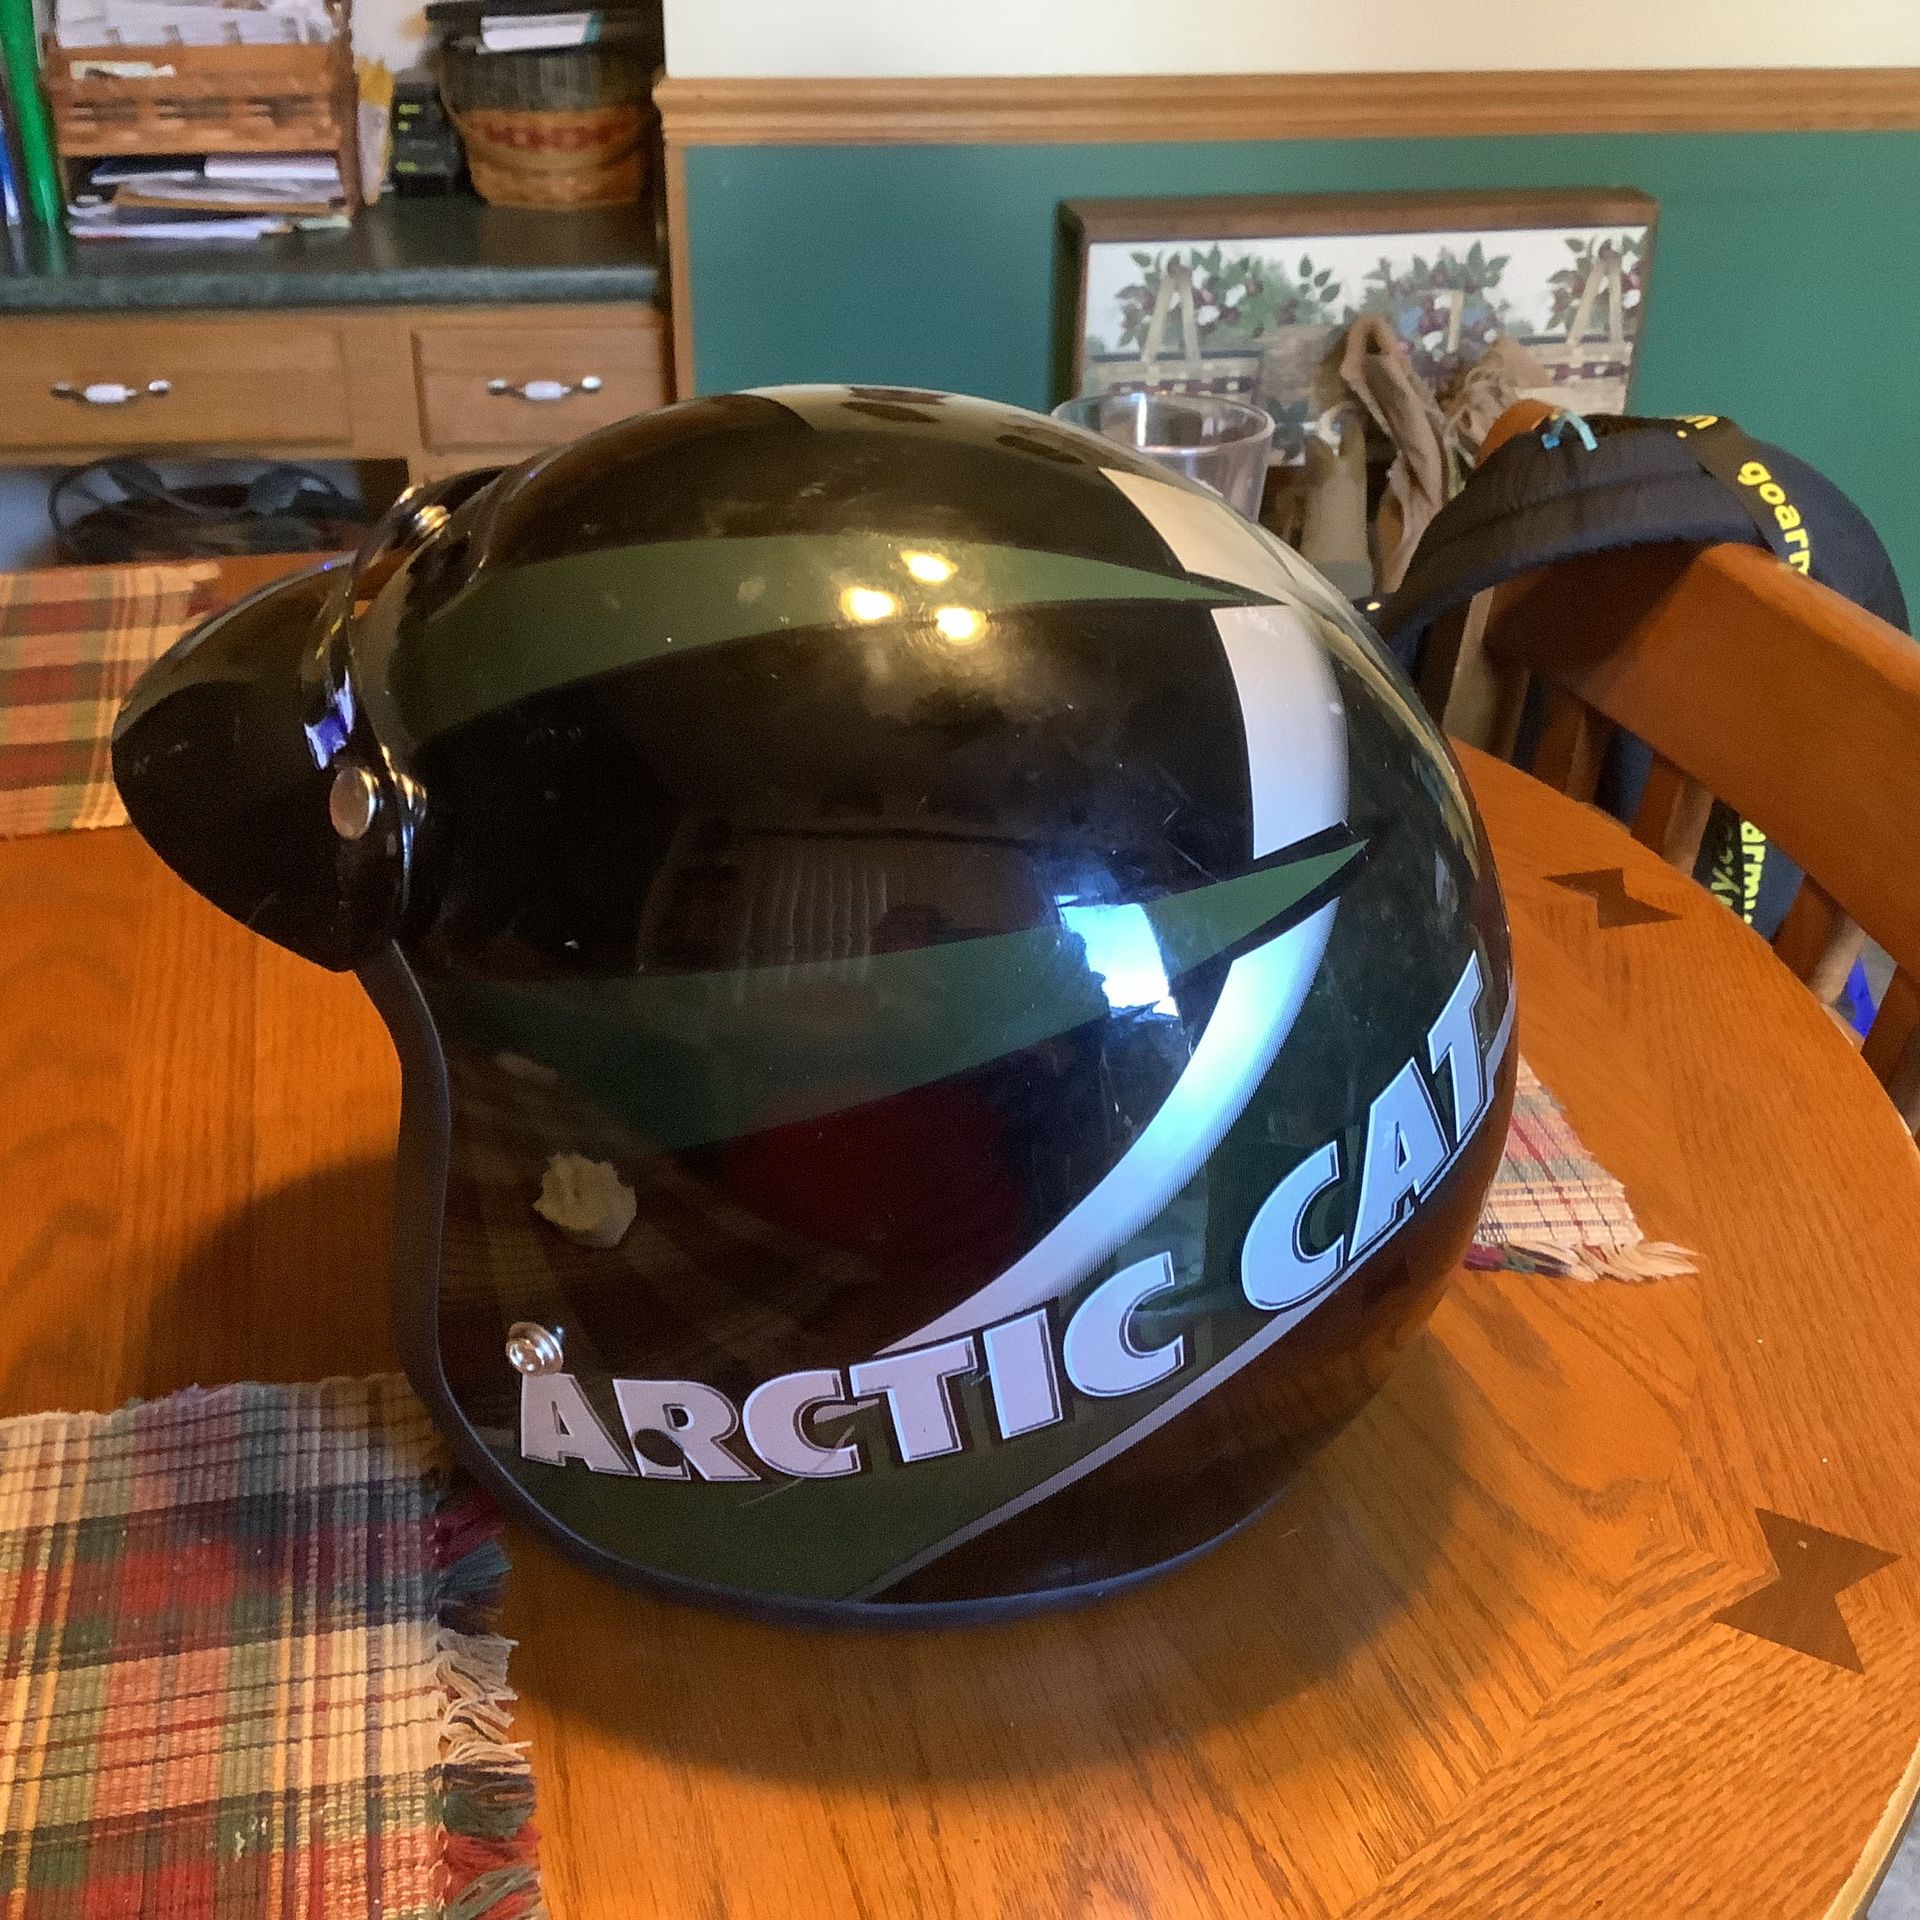 Arctic Cat Snowmobile Helmet  with top Visor Size XXL Nasson  Black with green and grey stripes. Very clean with no rips or issues DOT Plainfield Illi